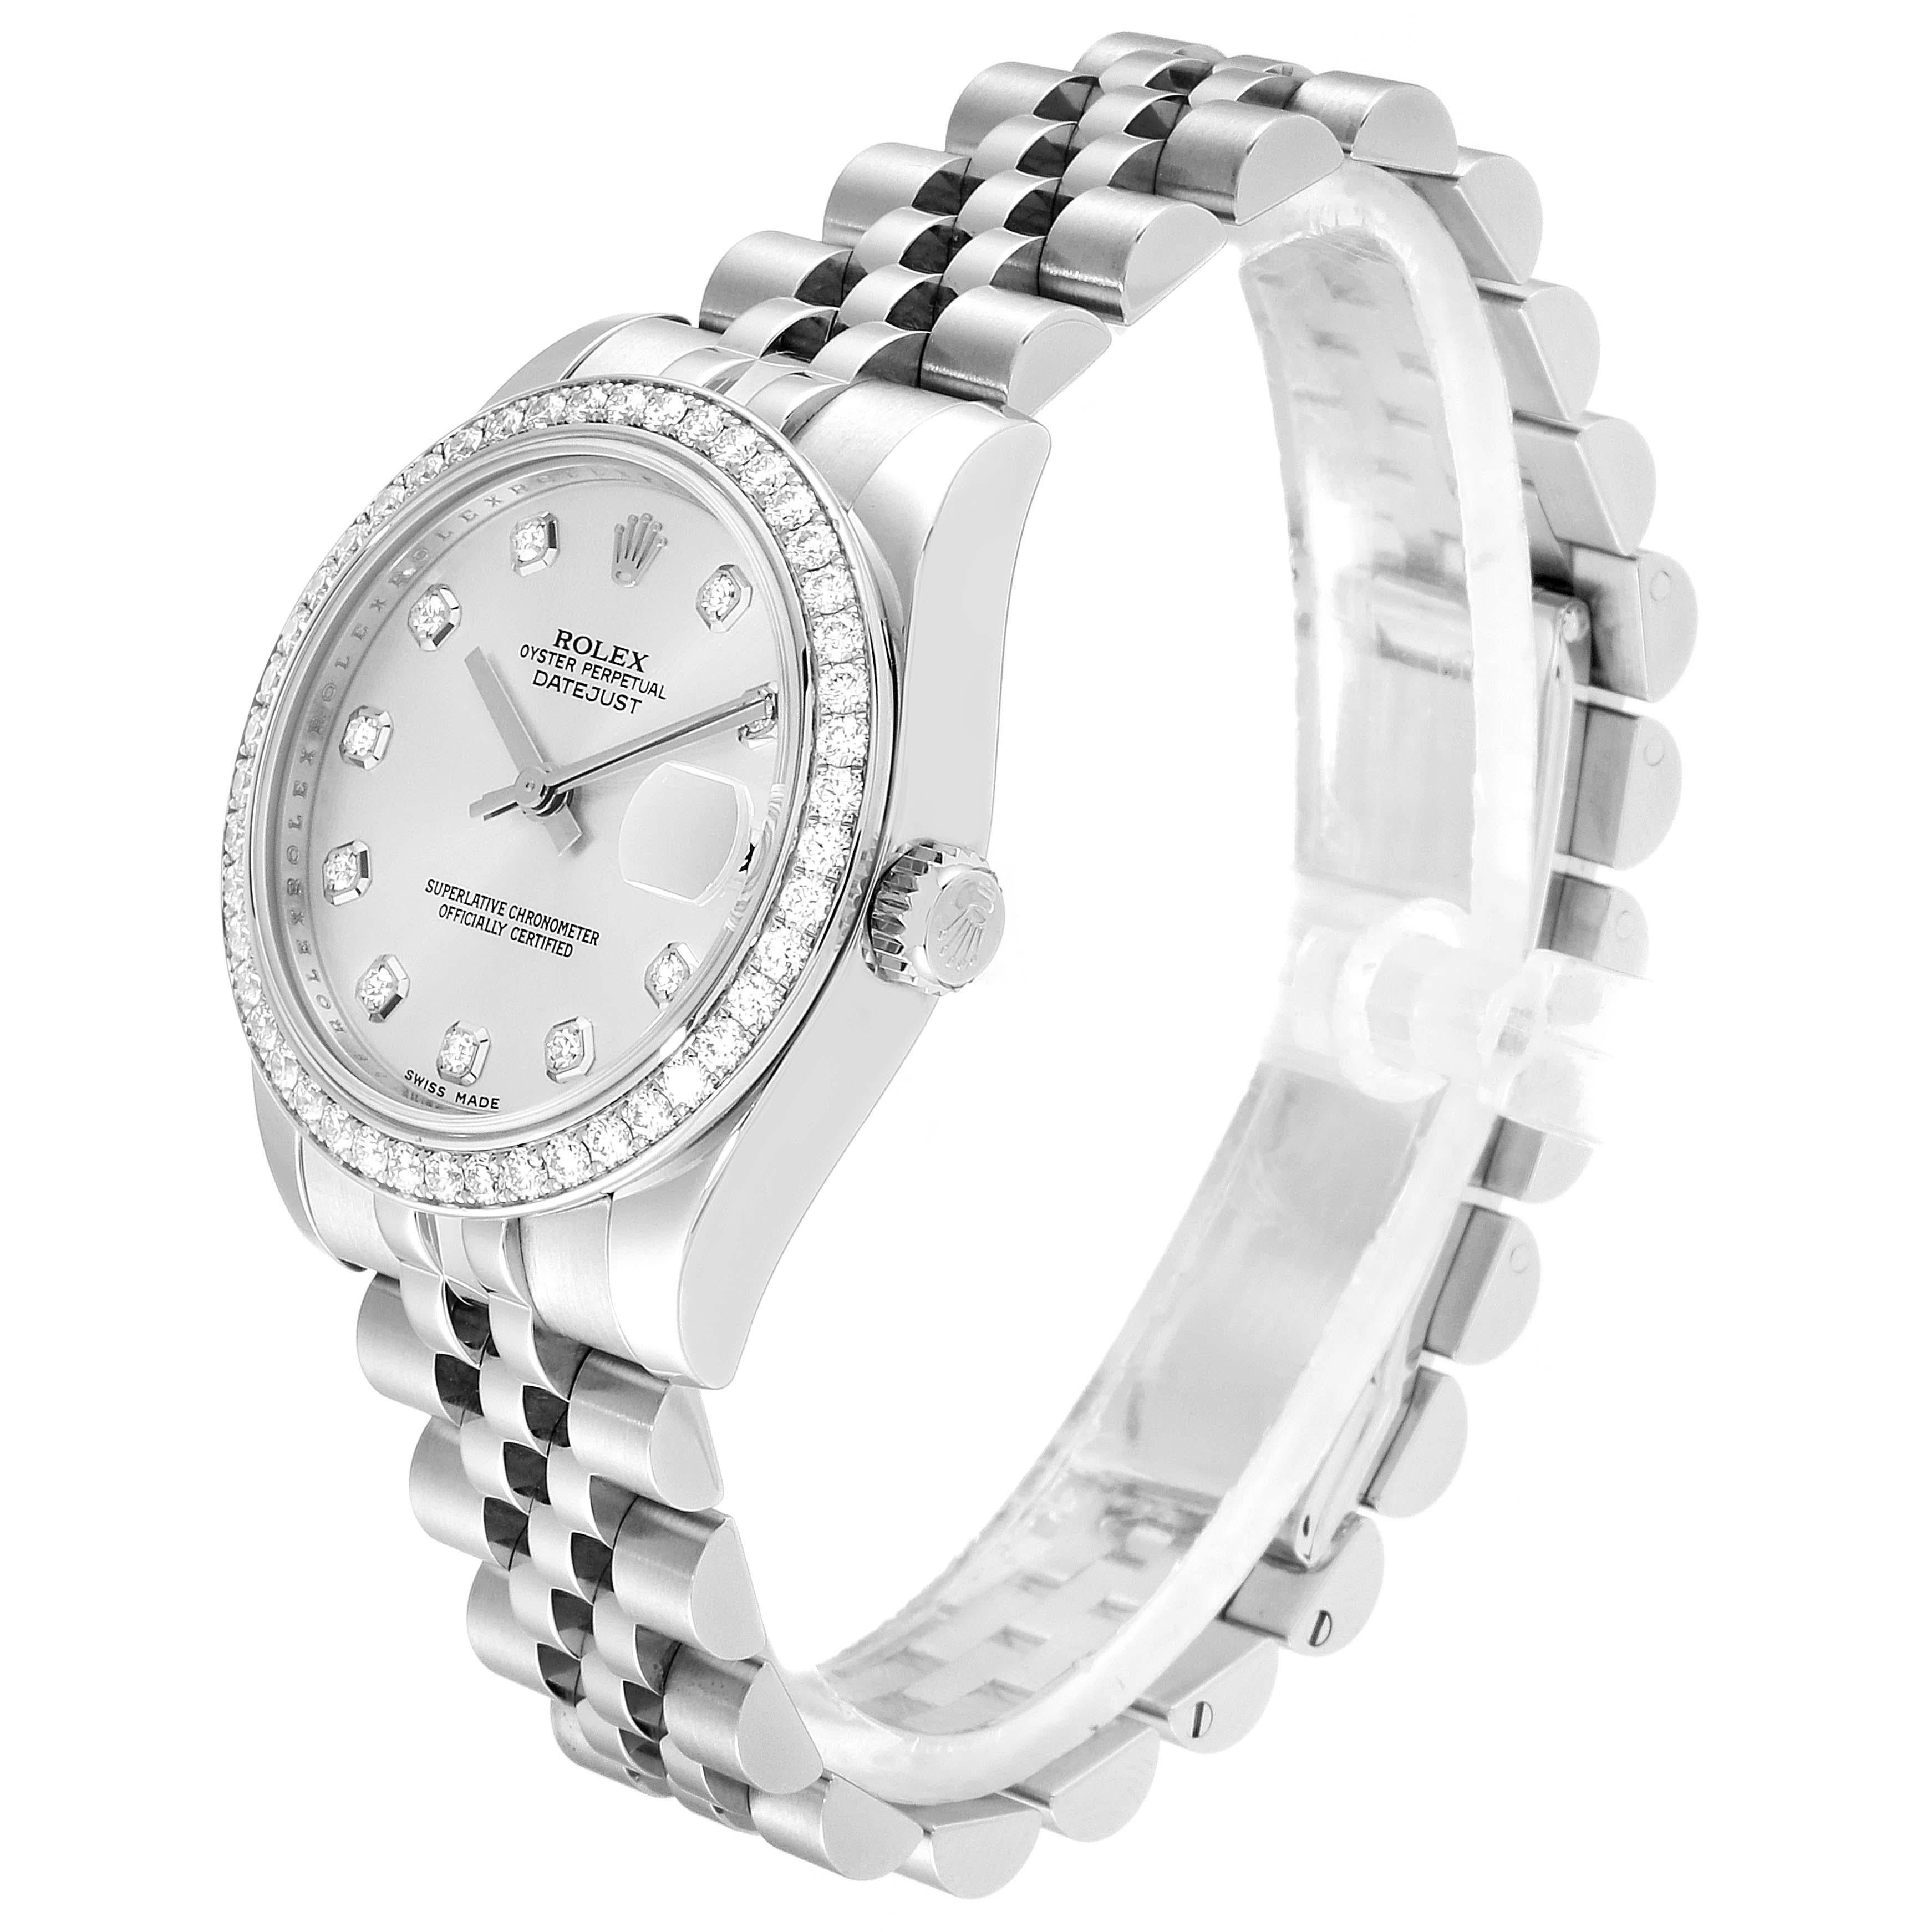 Be humble with this wristwatch from Rolex. The watch has a round stainless steel case and an 18k white gold bezel set with diamonds. It encases a silver dial that features raised sparkling diamond indices as hour-markers, a date window, and steel